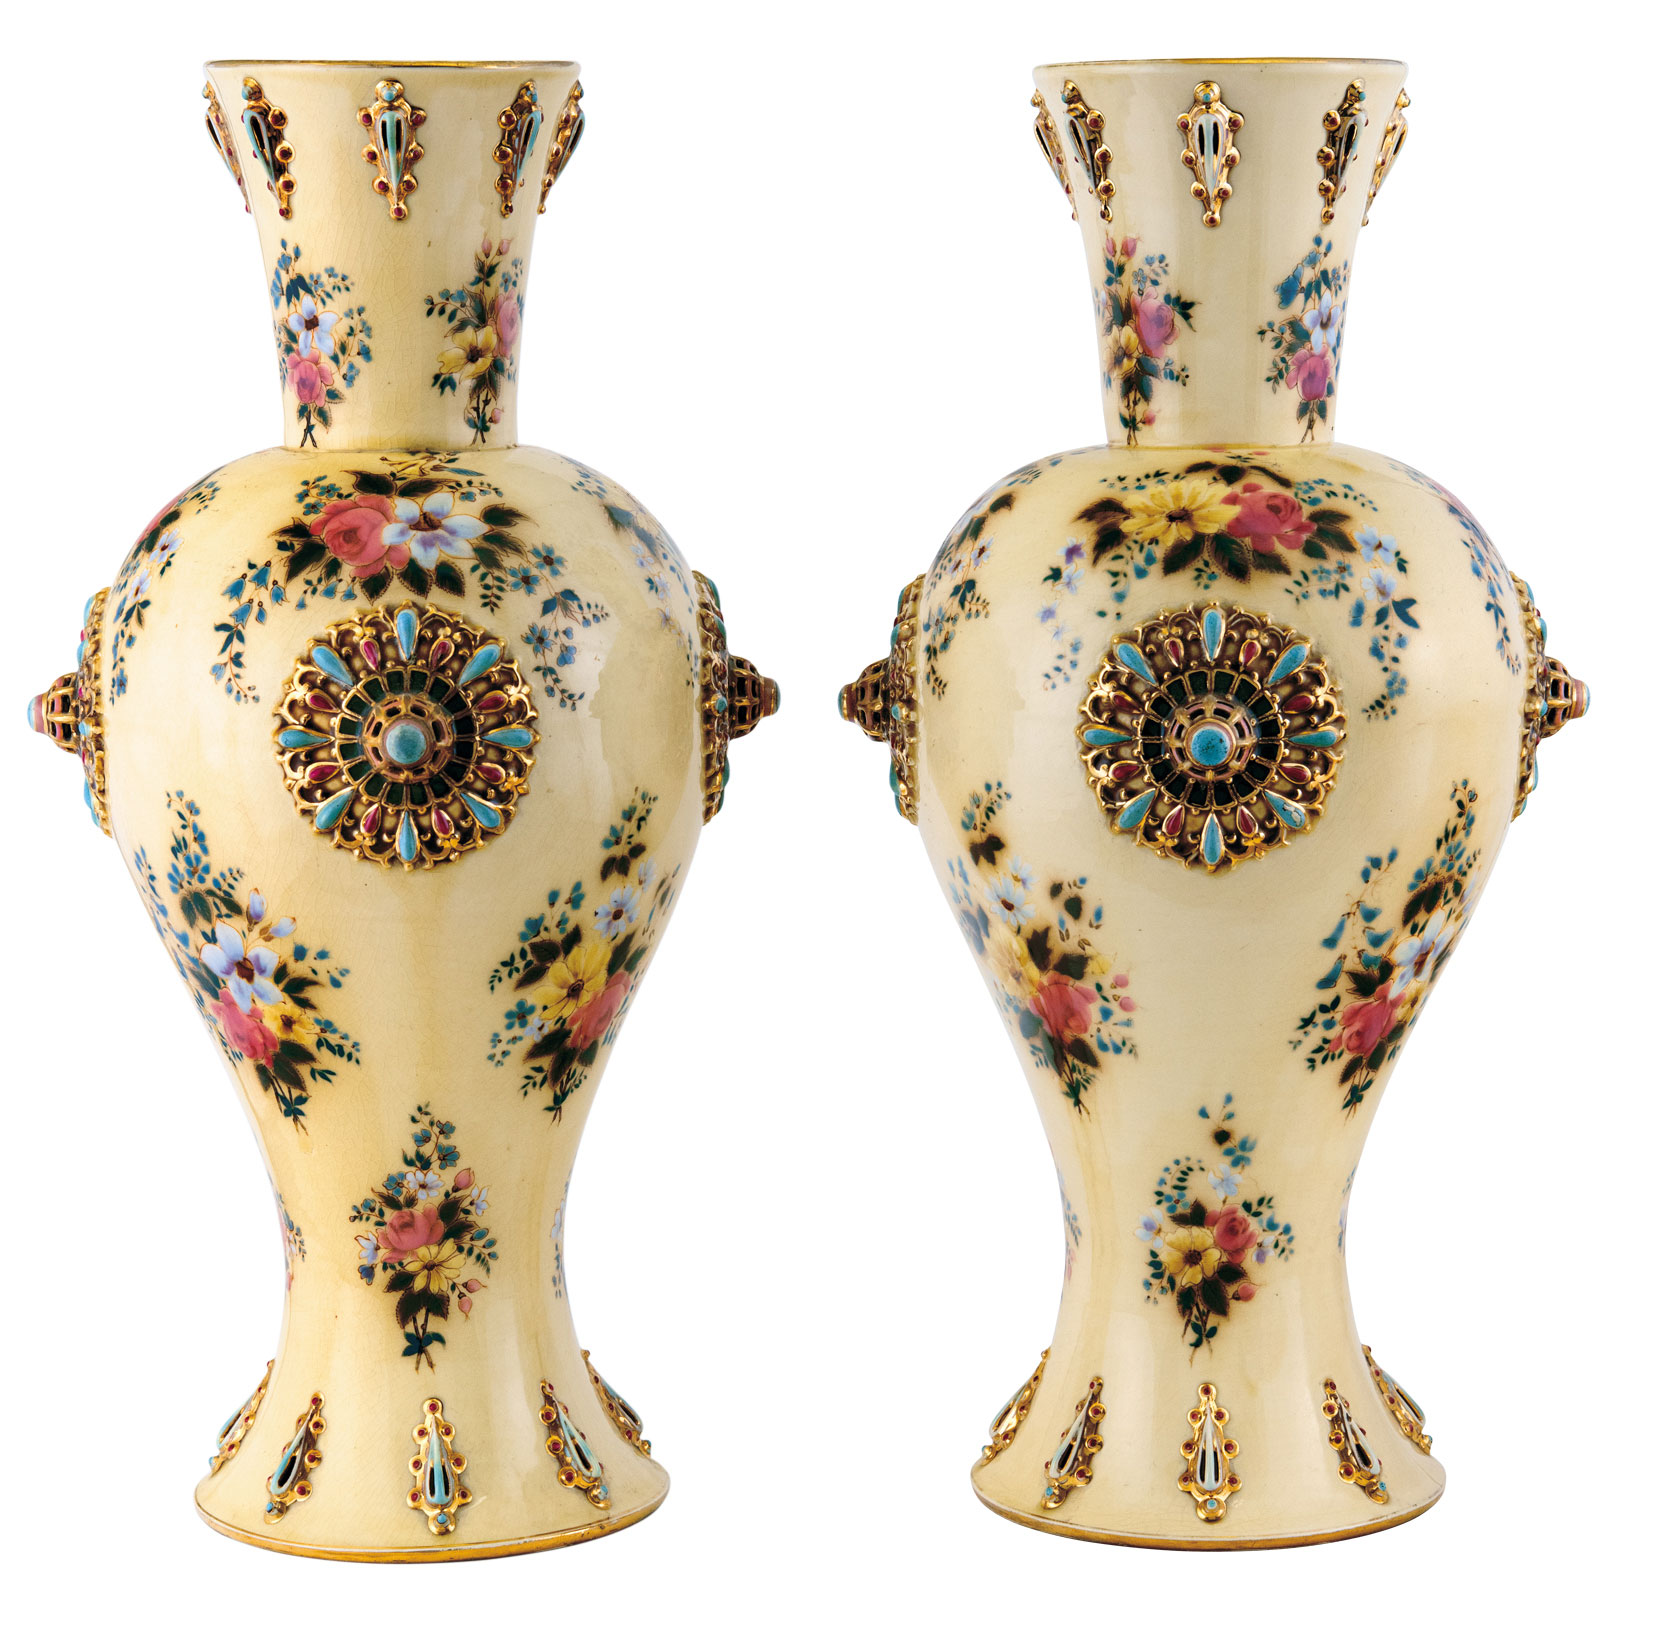 Zsolnay A Pair of Decorative Vases, around 1880